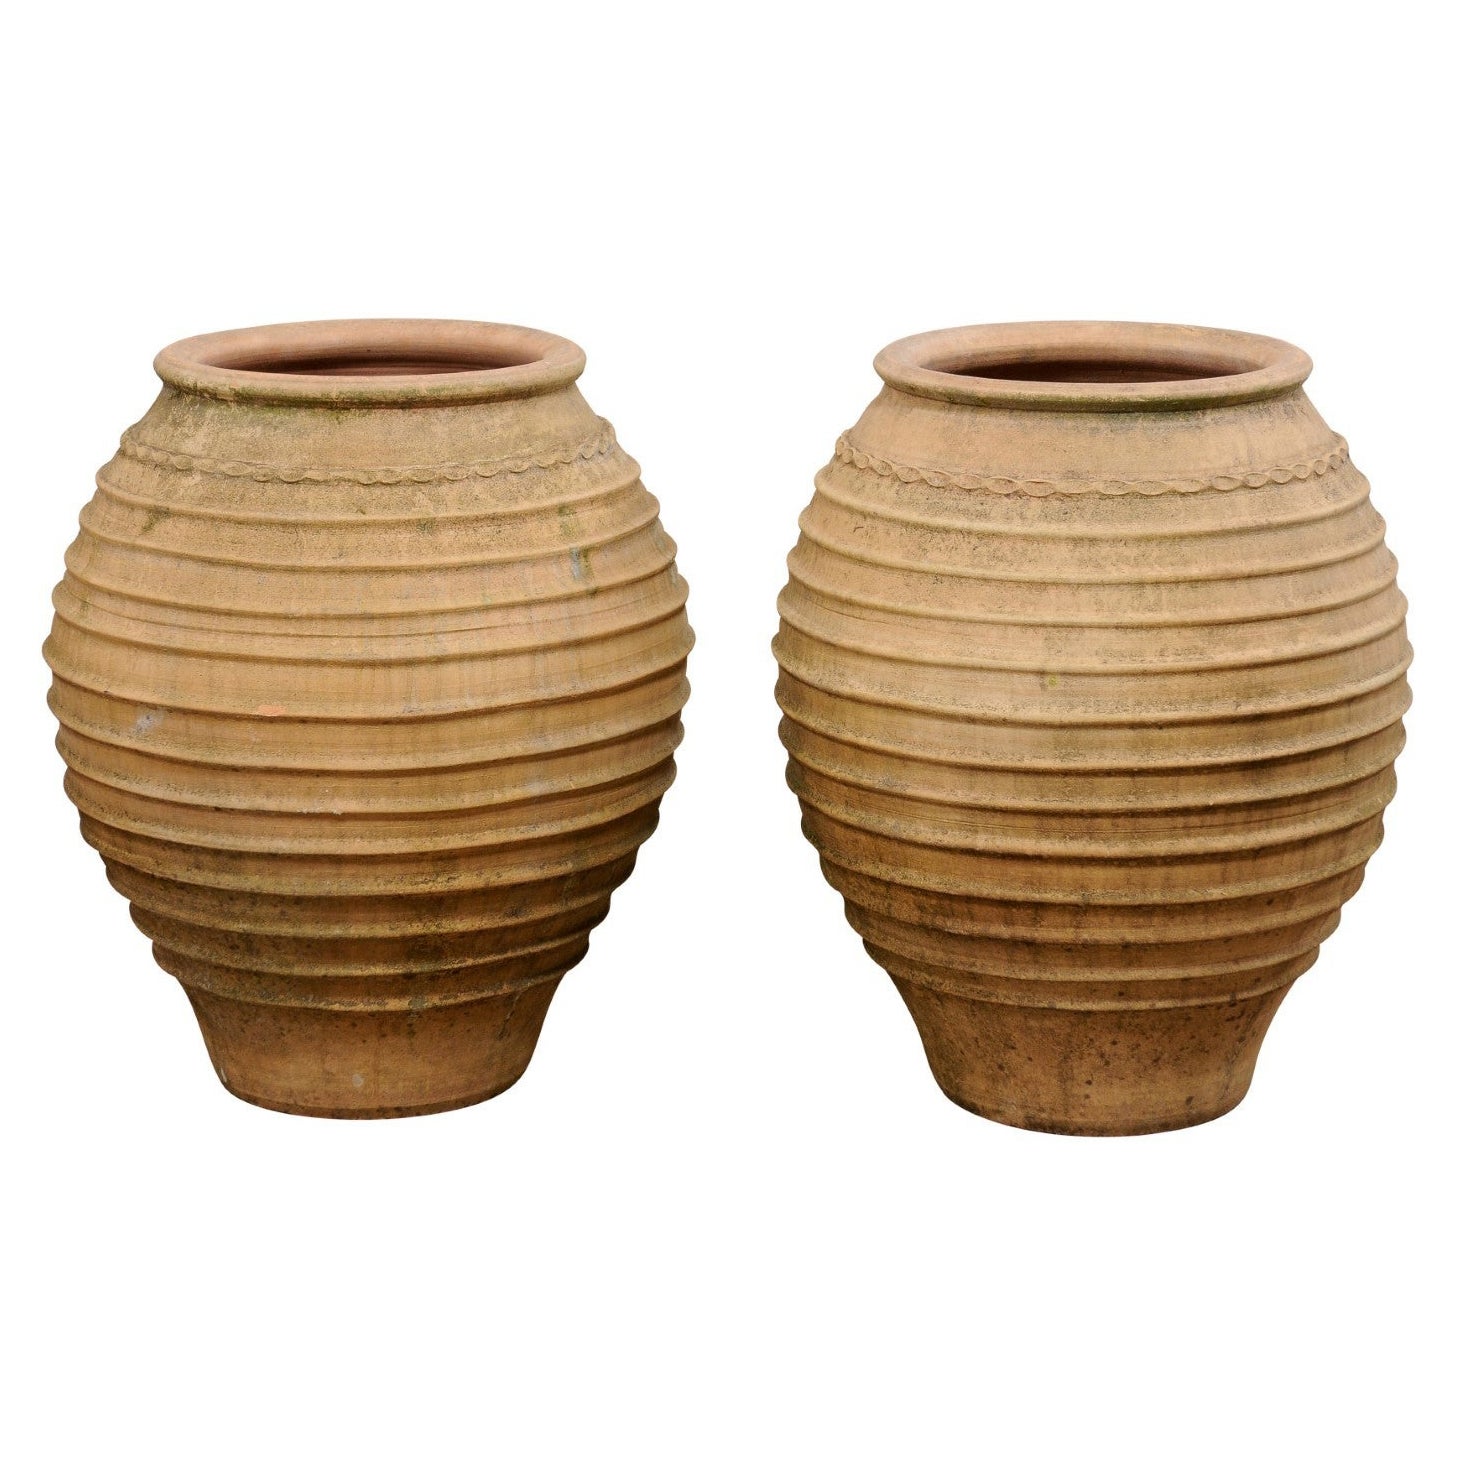 Pair Spanish Terracotta Bulb-Shaped Pots, from the Early 20th Century